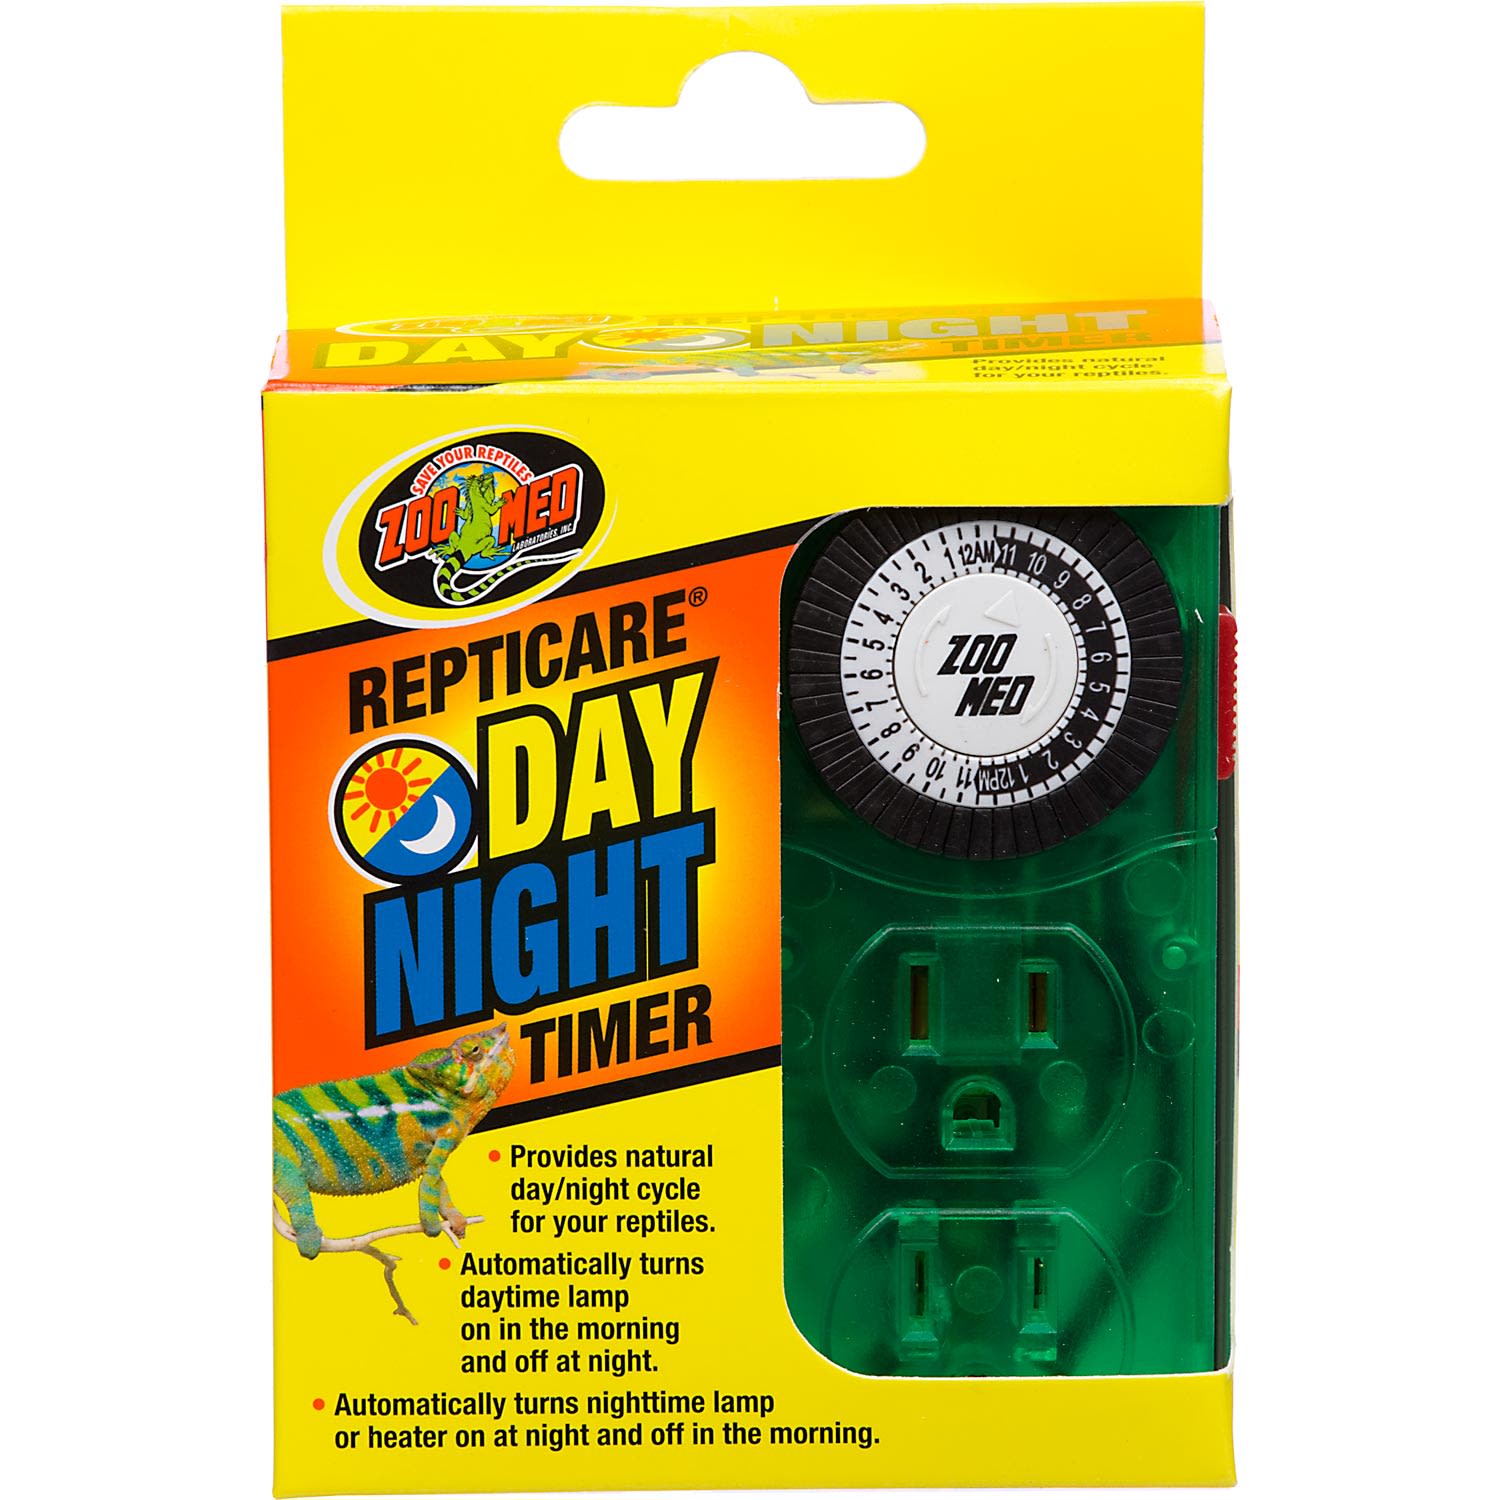 Includes Attached Pro-Tip Guide DBDPet Repticare Day & Night Reptile Timer Automate Your Reptiles Lighting & Heating Schedules 